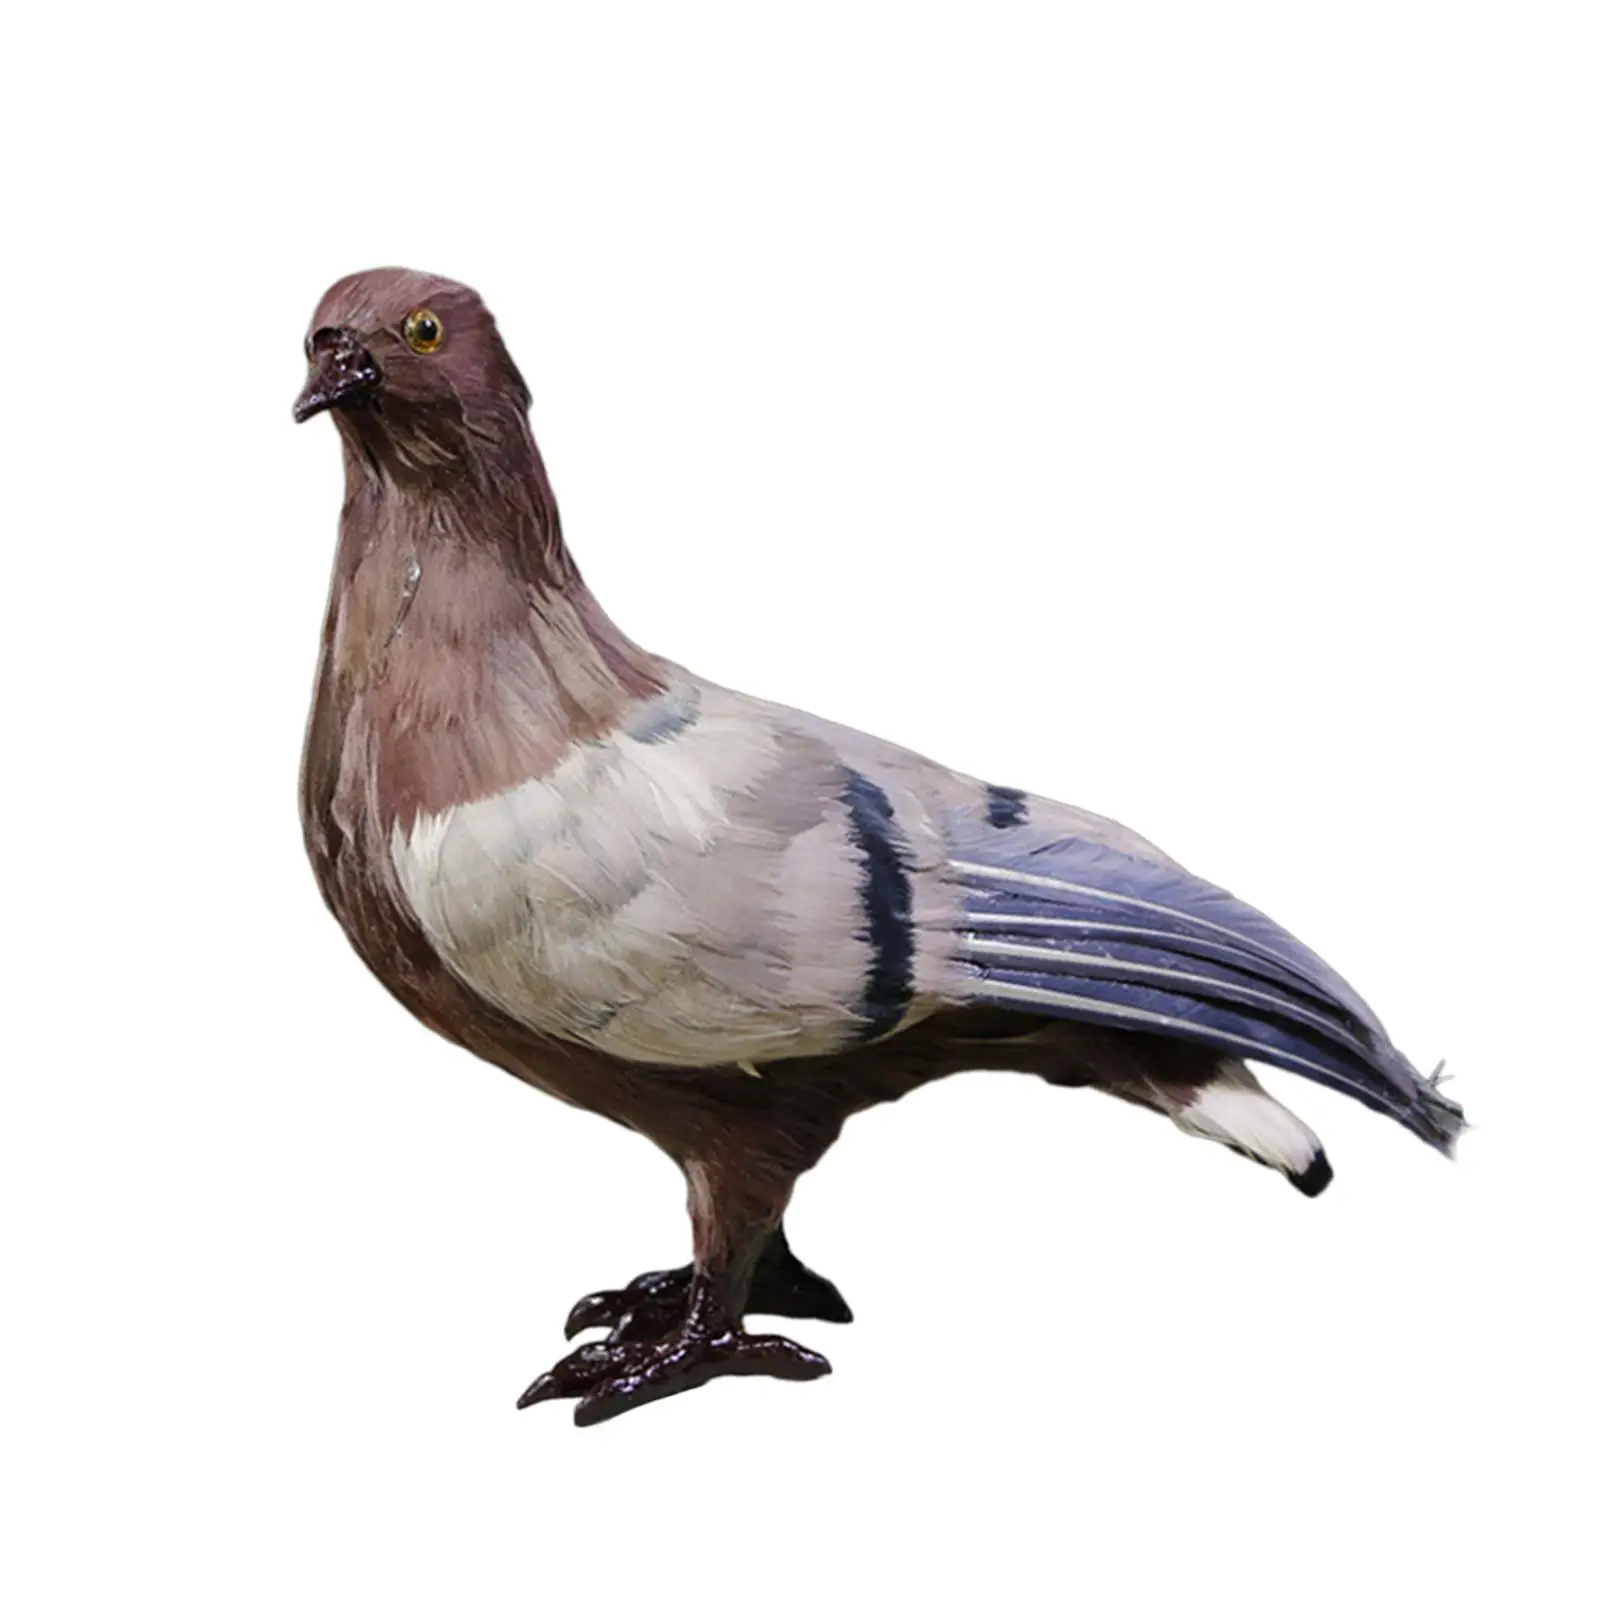 Simulation Pigeon Model Figurine Craft Collectible Decorative Bird Toy Artificial Feather for Party Favors Versatile